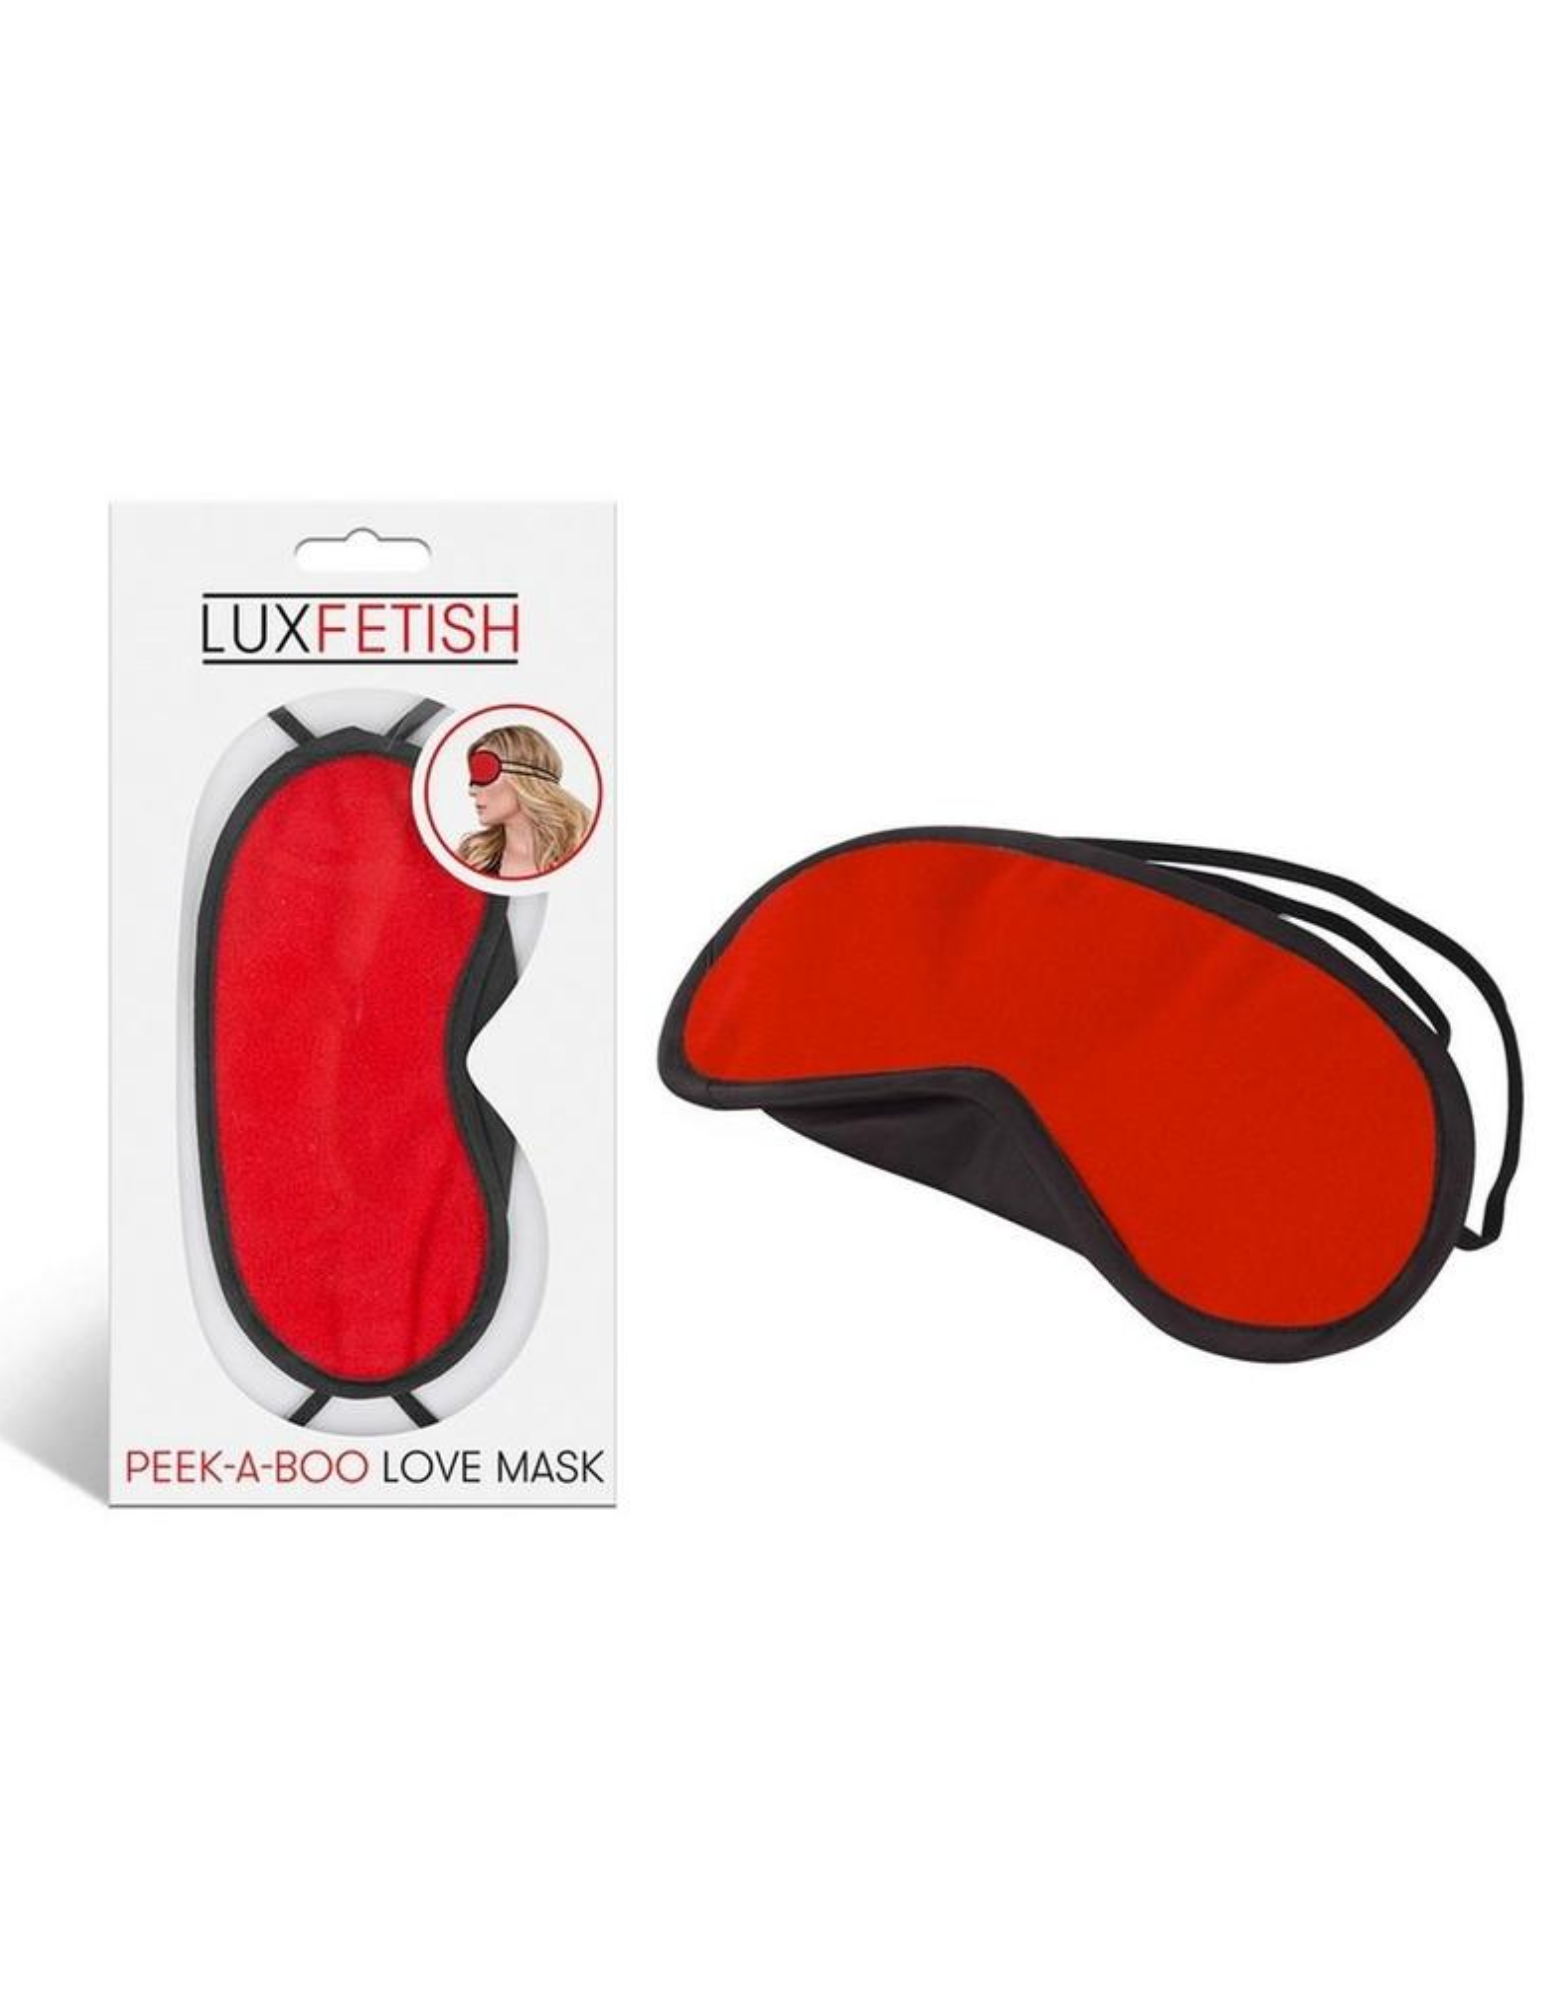 Photo shows the love mask in the package as well as next to it (red).